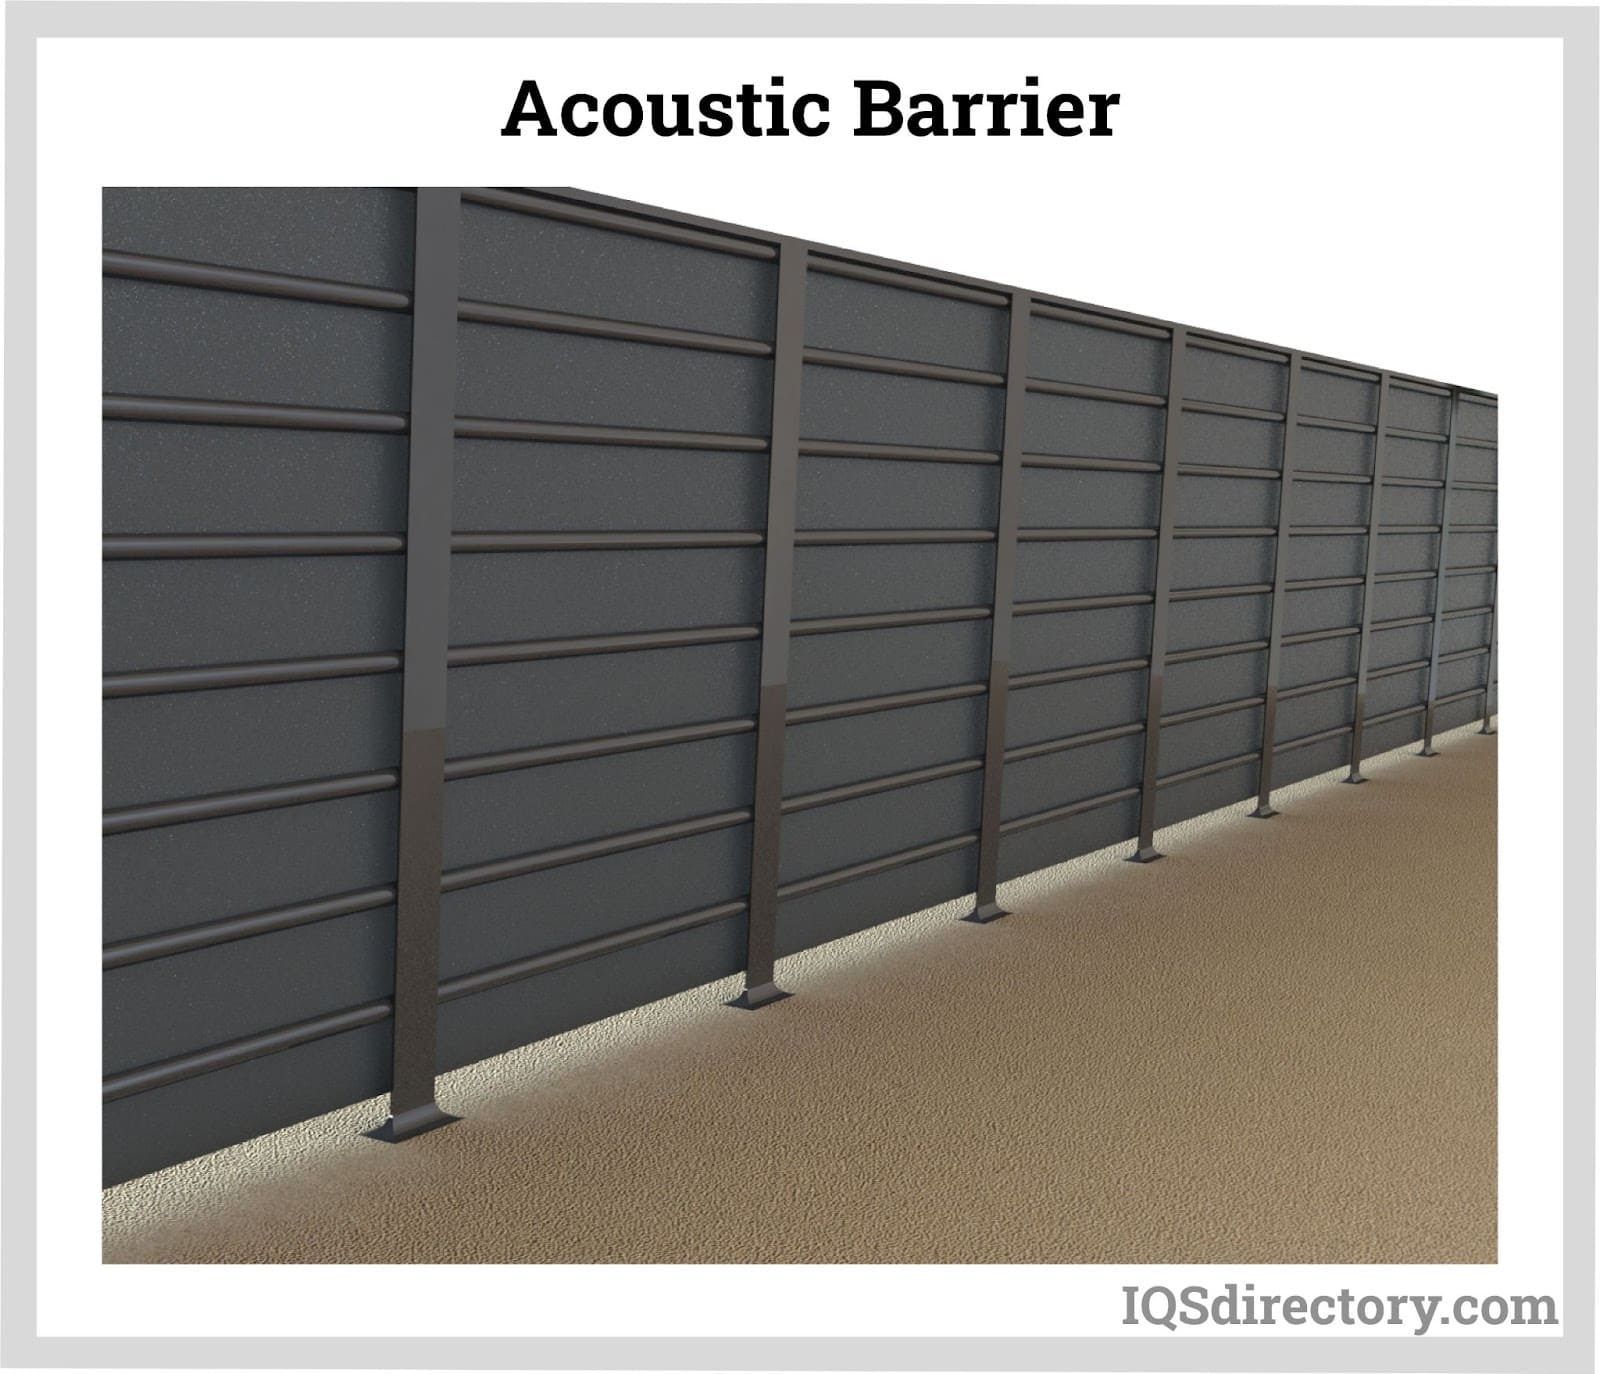 Should I Use Acoustic Wall Blankets for Industrial Noise Control?